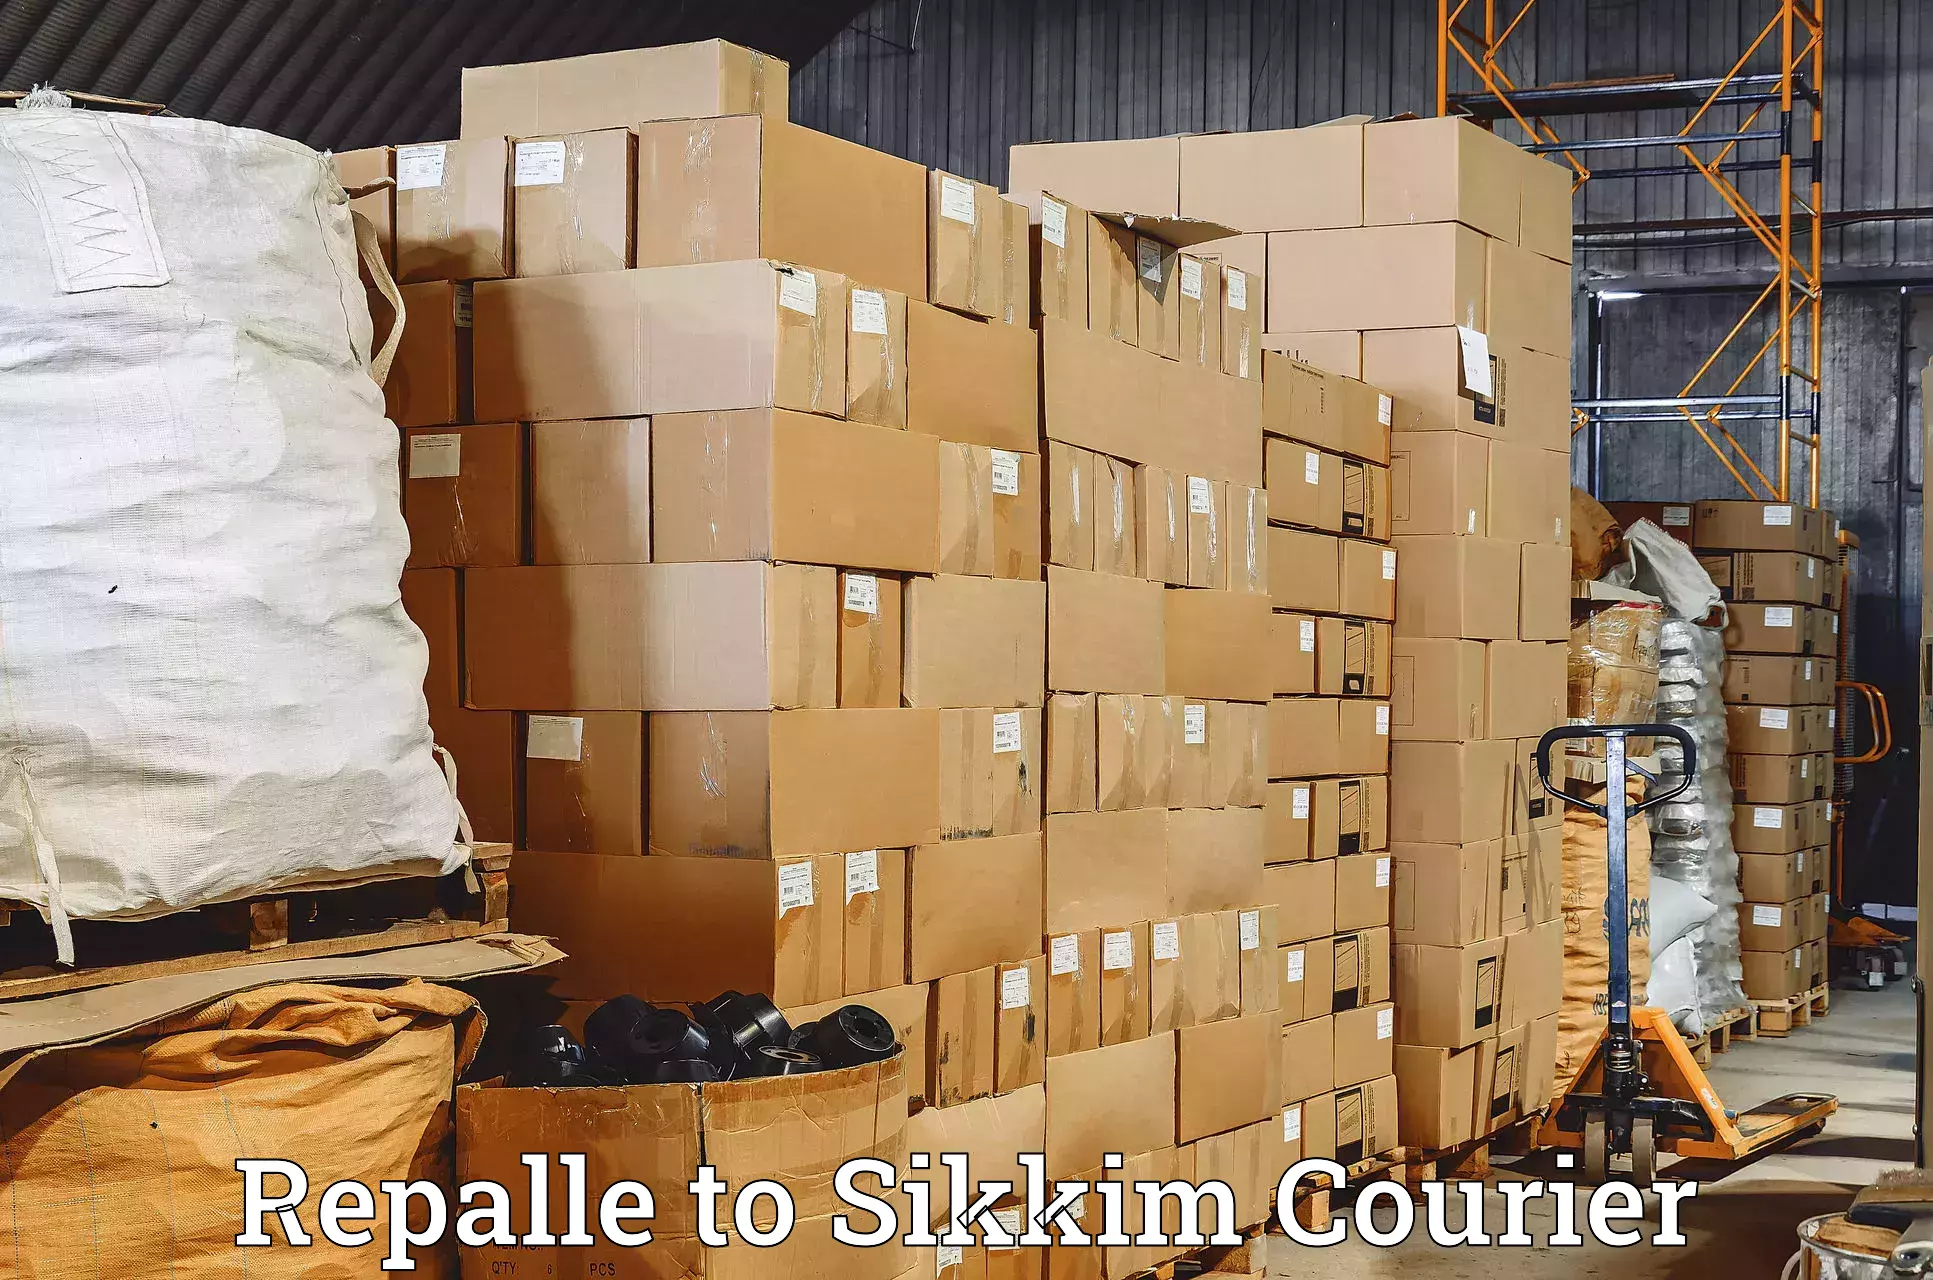 On-call courier service Repalle to Sikkim